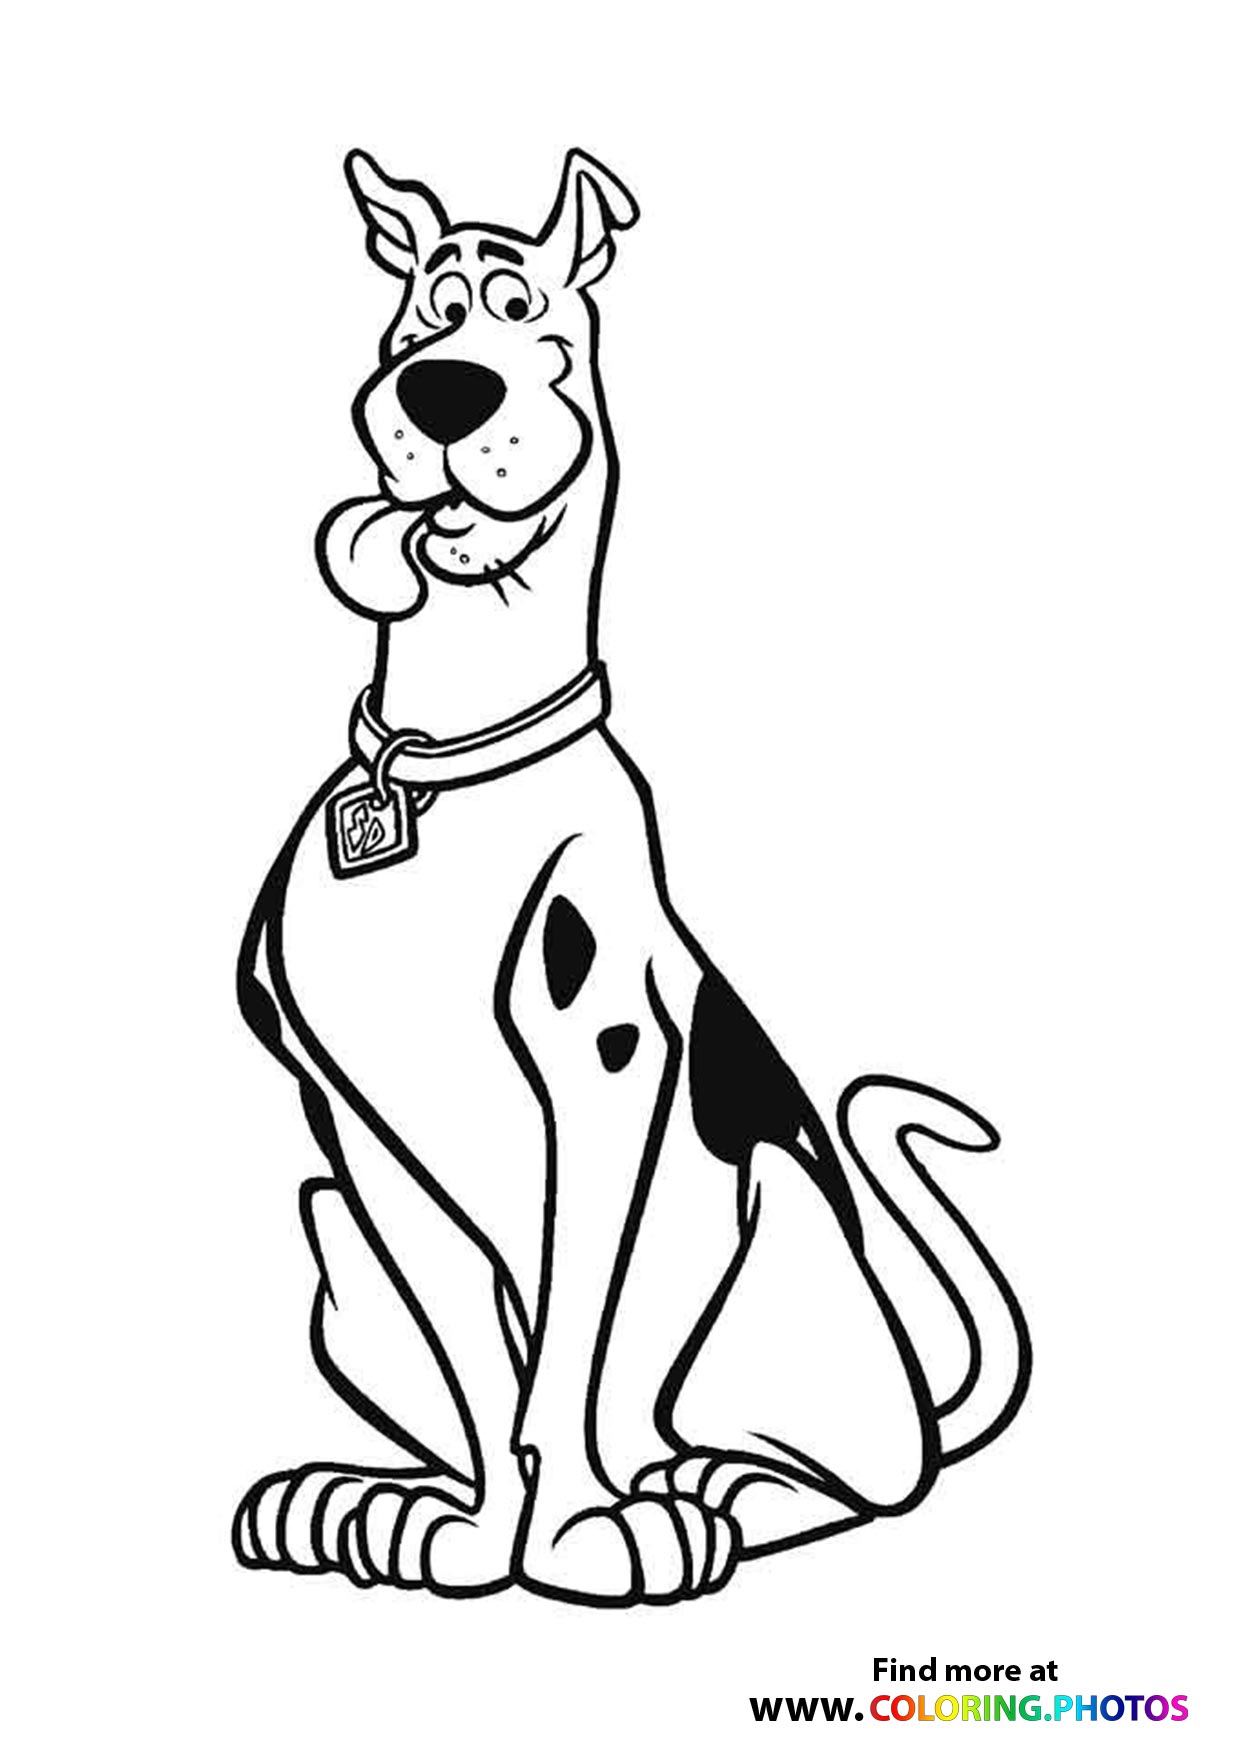 Printable Scooby Doo Coloring Pages - Customize and Print